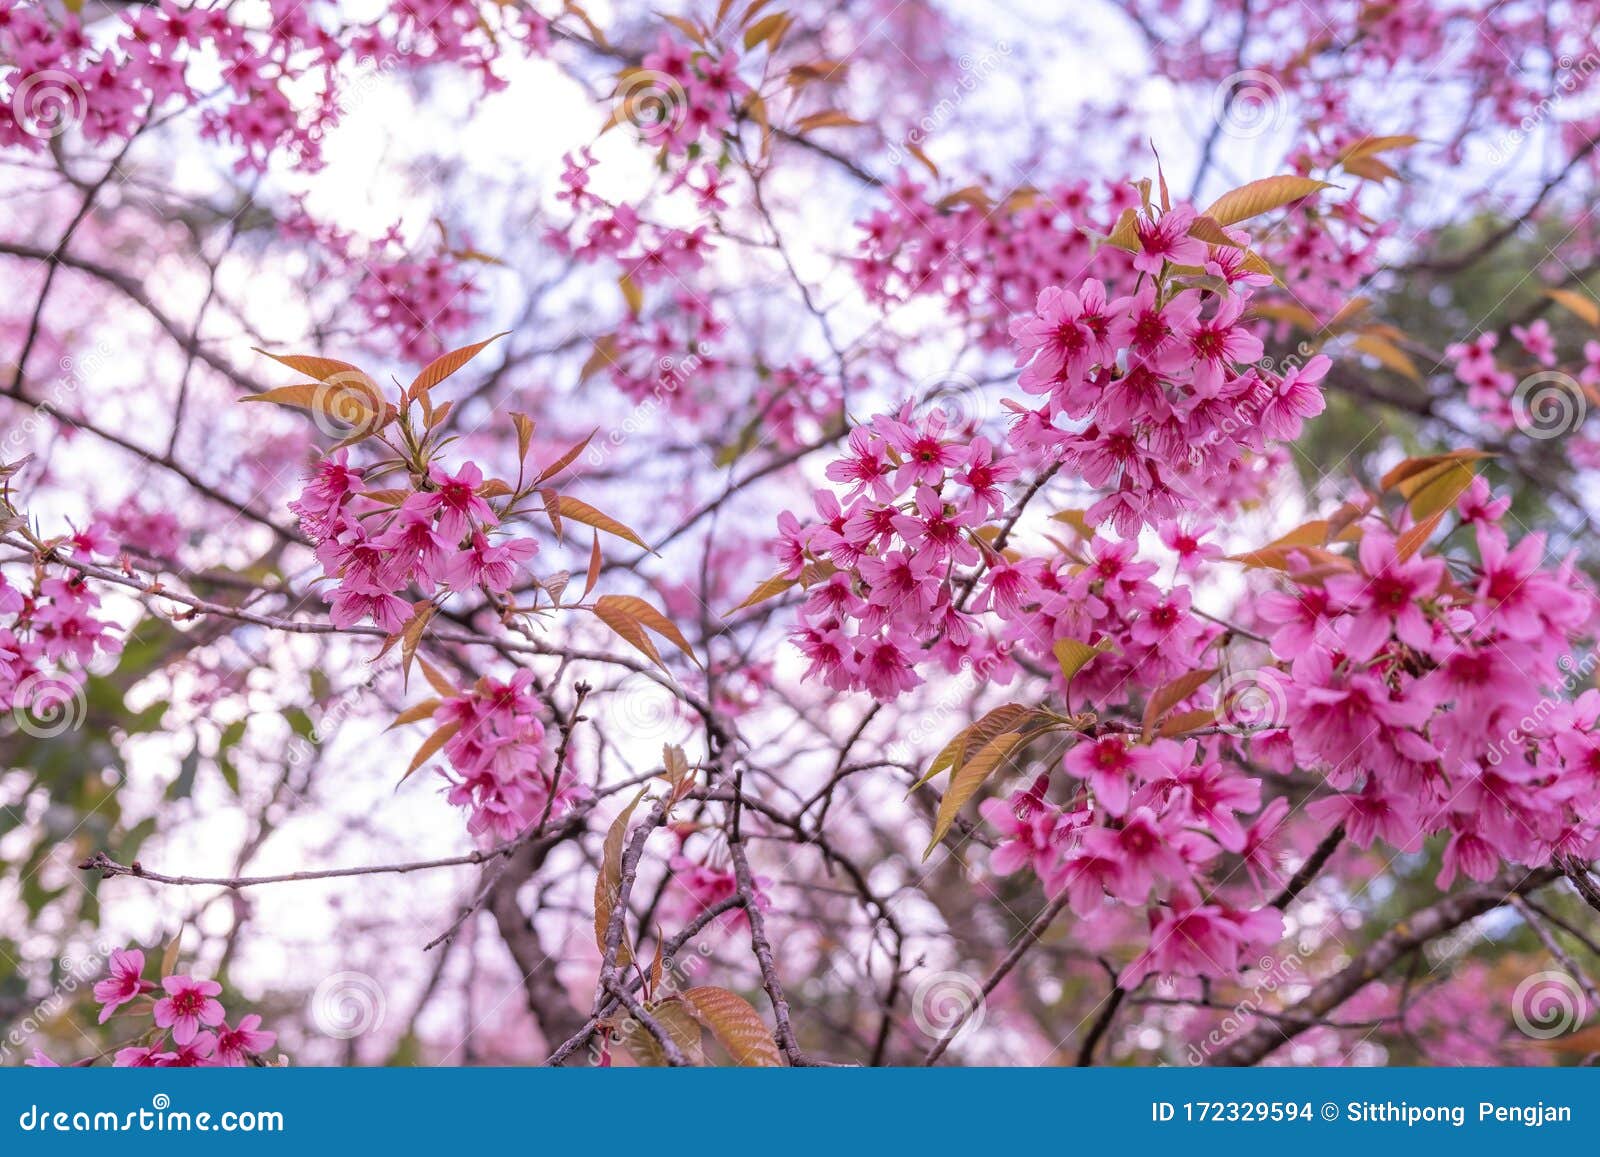 The Beautiful Pink Cherry Blossom Flower On The Tree In Winter Season